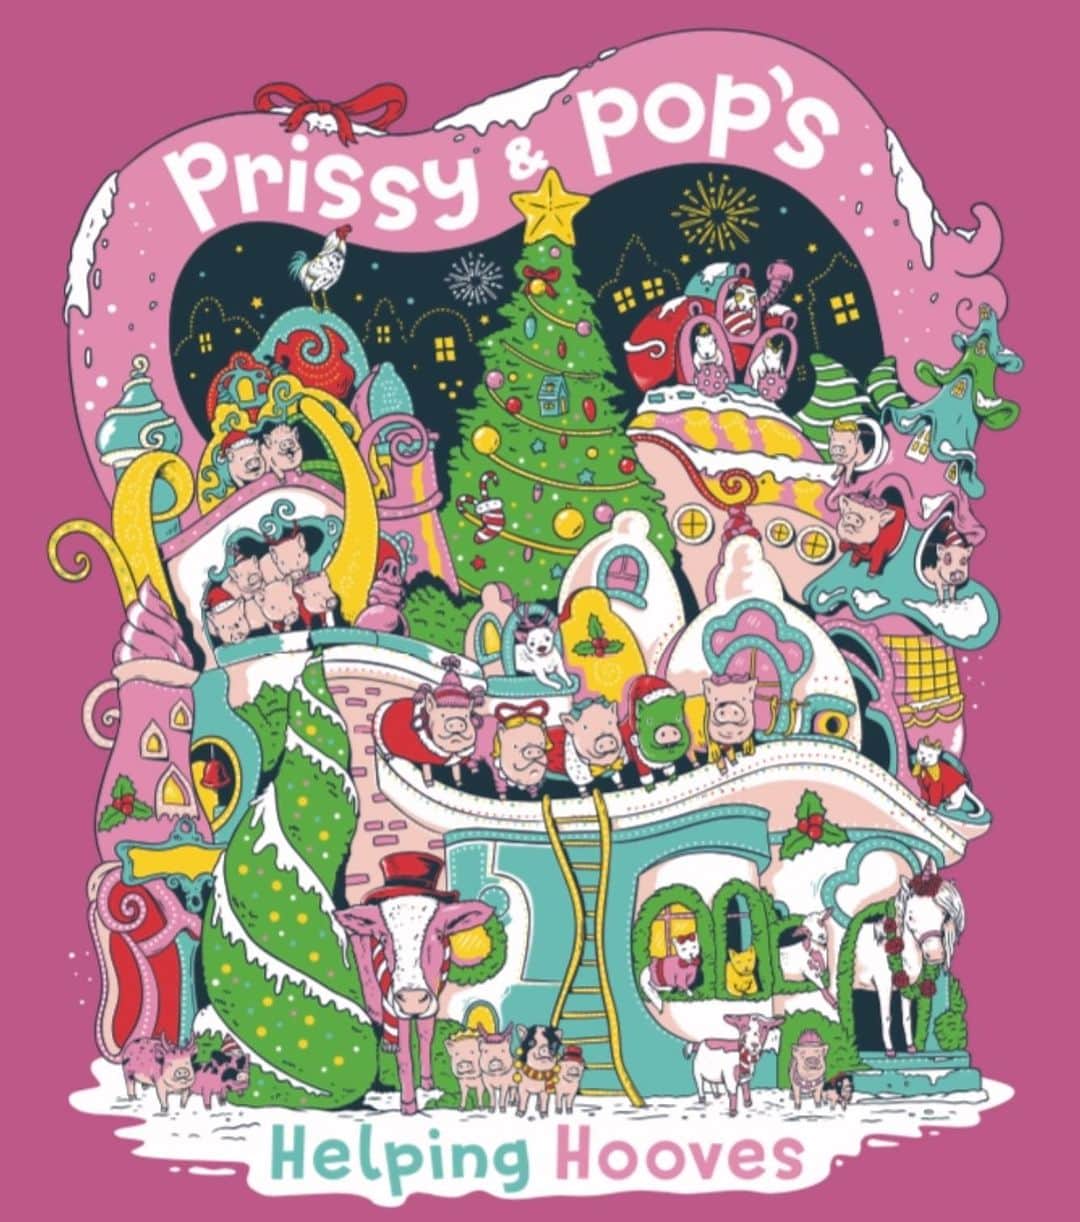 Priscilla and Poppletonのインスタグラム：「SQUEAL!!! Our 2023 Christmas apparel is here! Grinchmas meets Pigmas this year! Check us out in the middle surrounded by some of our farm friends! Proceeds from these shirts go to our non-profit animal rescue, Prissy & Pop’s Helping Hooves. Click the LINK IN OUR BIO to shop. There are short sleeve tees, long sleeve tees, hoodies, sweatshirts and more each available in a multitude of colors. They are only available for TWO WEEKS to ensure you get them in time to wear them before Christmas, so grab one before it’s too late. We hope you love it as much as we do. Zoom in and see Silly Pop as the Grinch and me as Cindy Lou Who! It’s one of our favorite designs yet!🐷💚❤️ #grinchmas #pigmas #prissyandpopshelpinghooves #PrissyandPop」